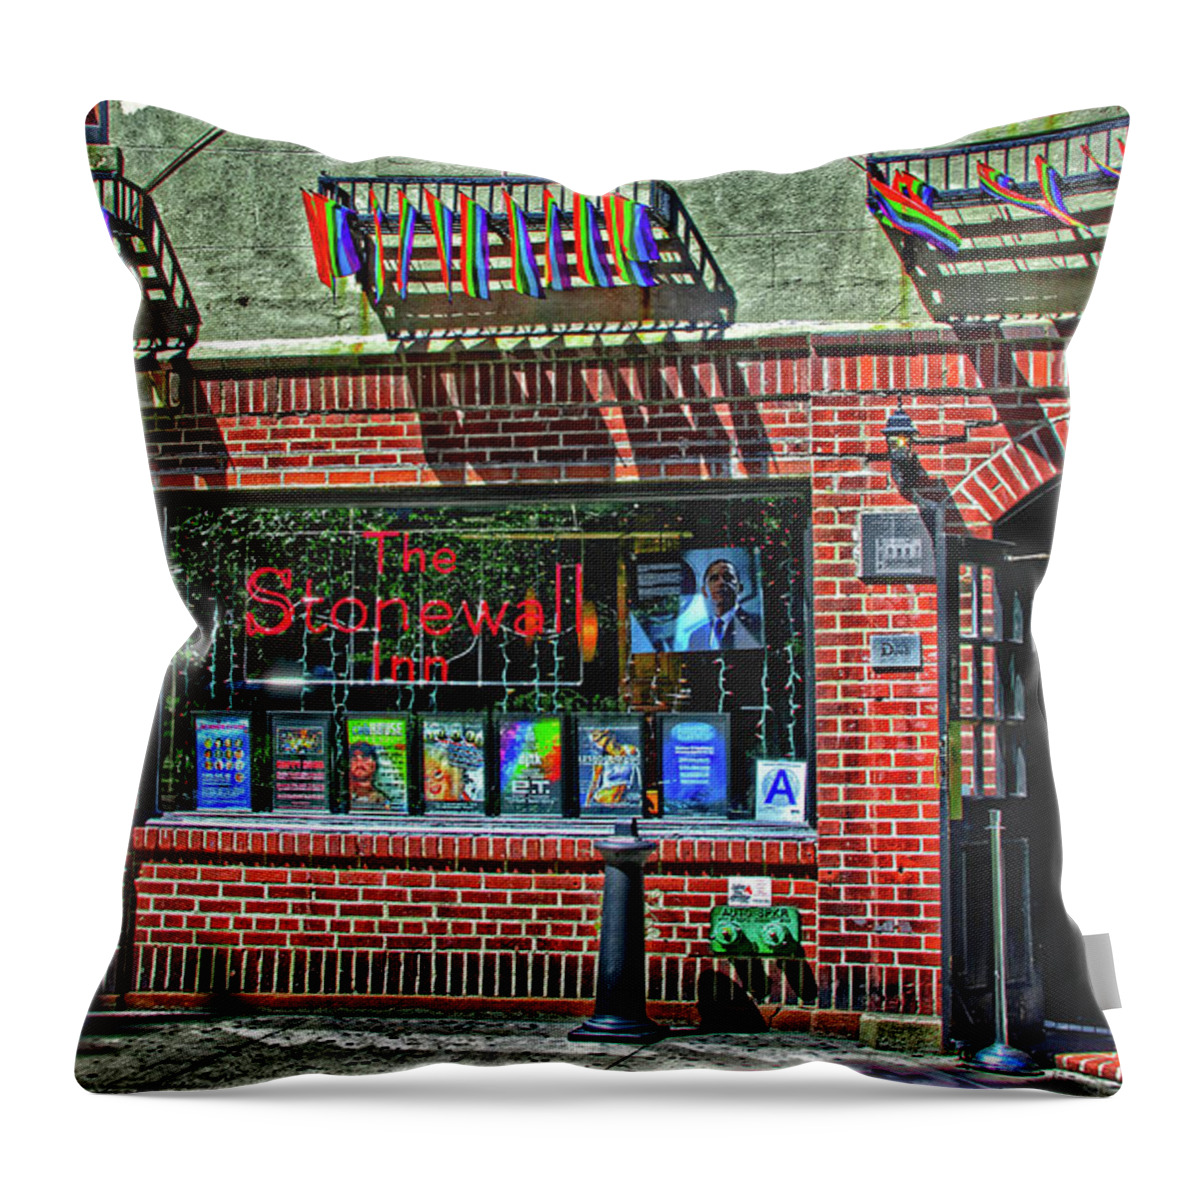 Stonewall Inn Throw Pillow featuring the photograph The Beginning by Kathi Isserman